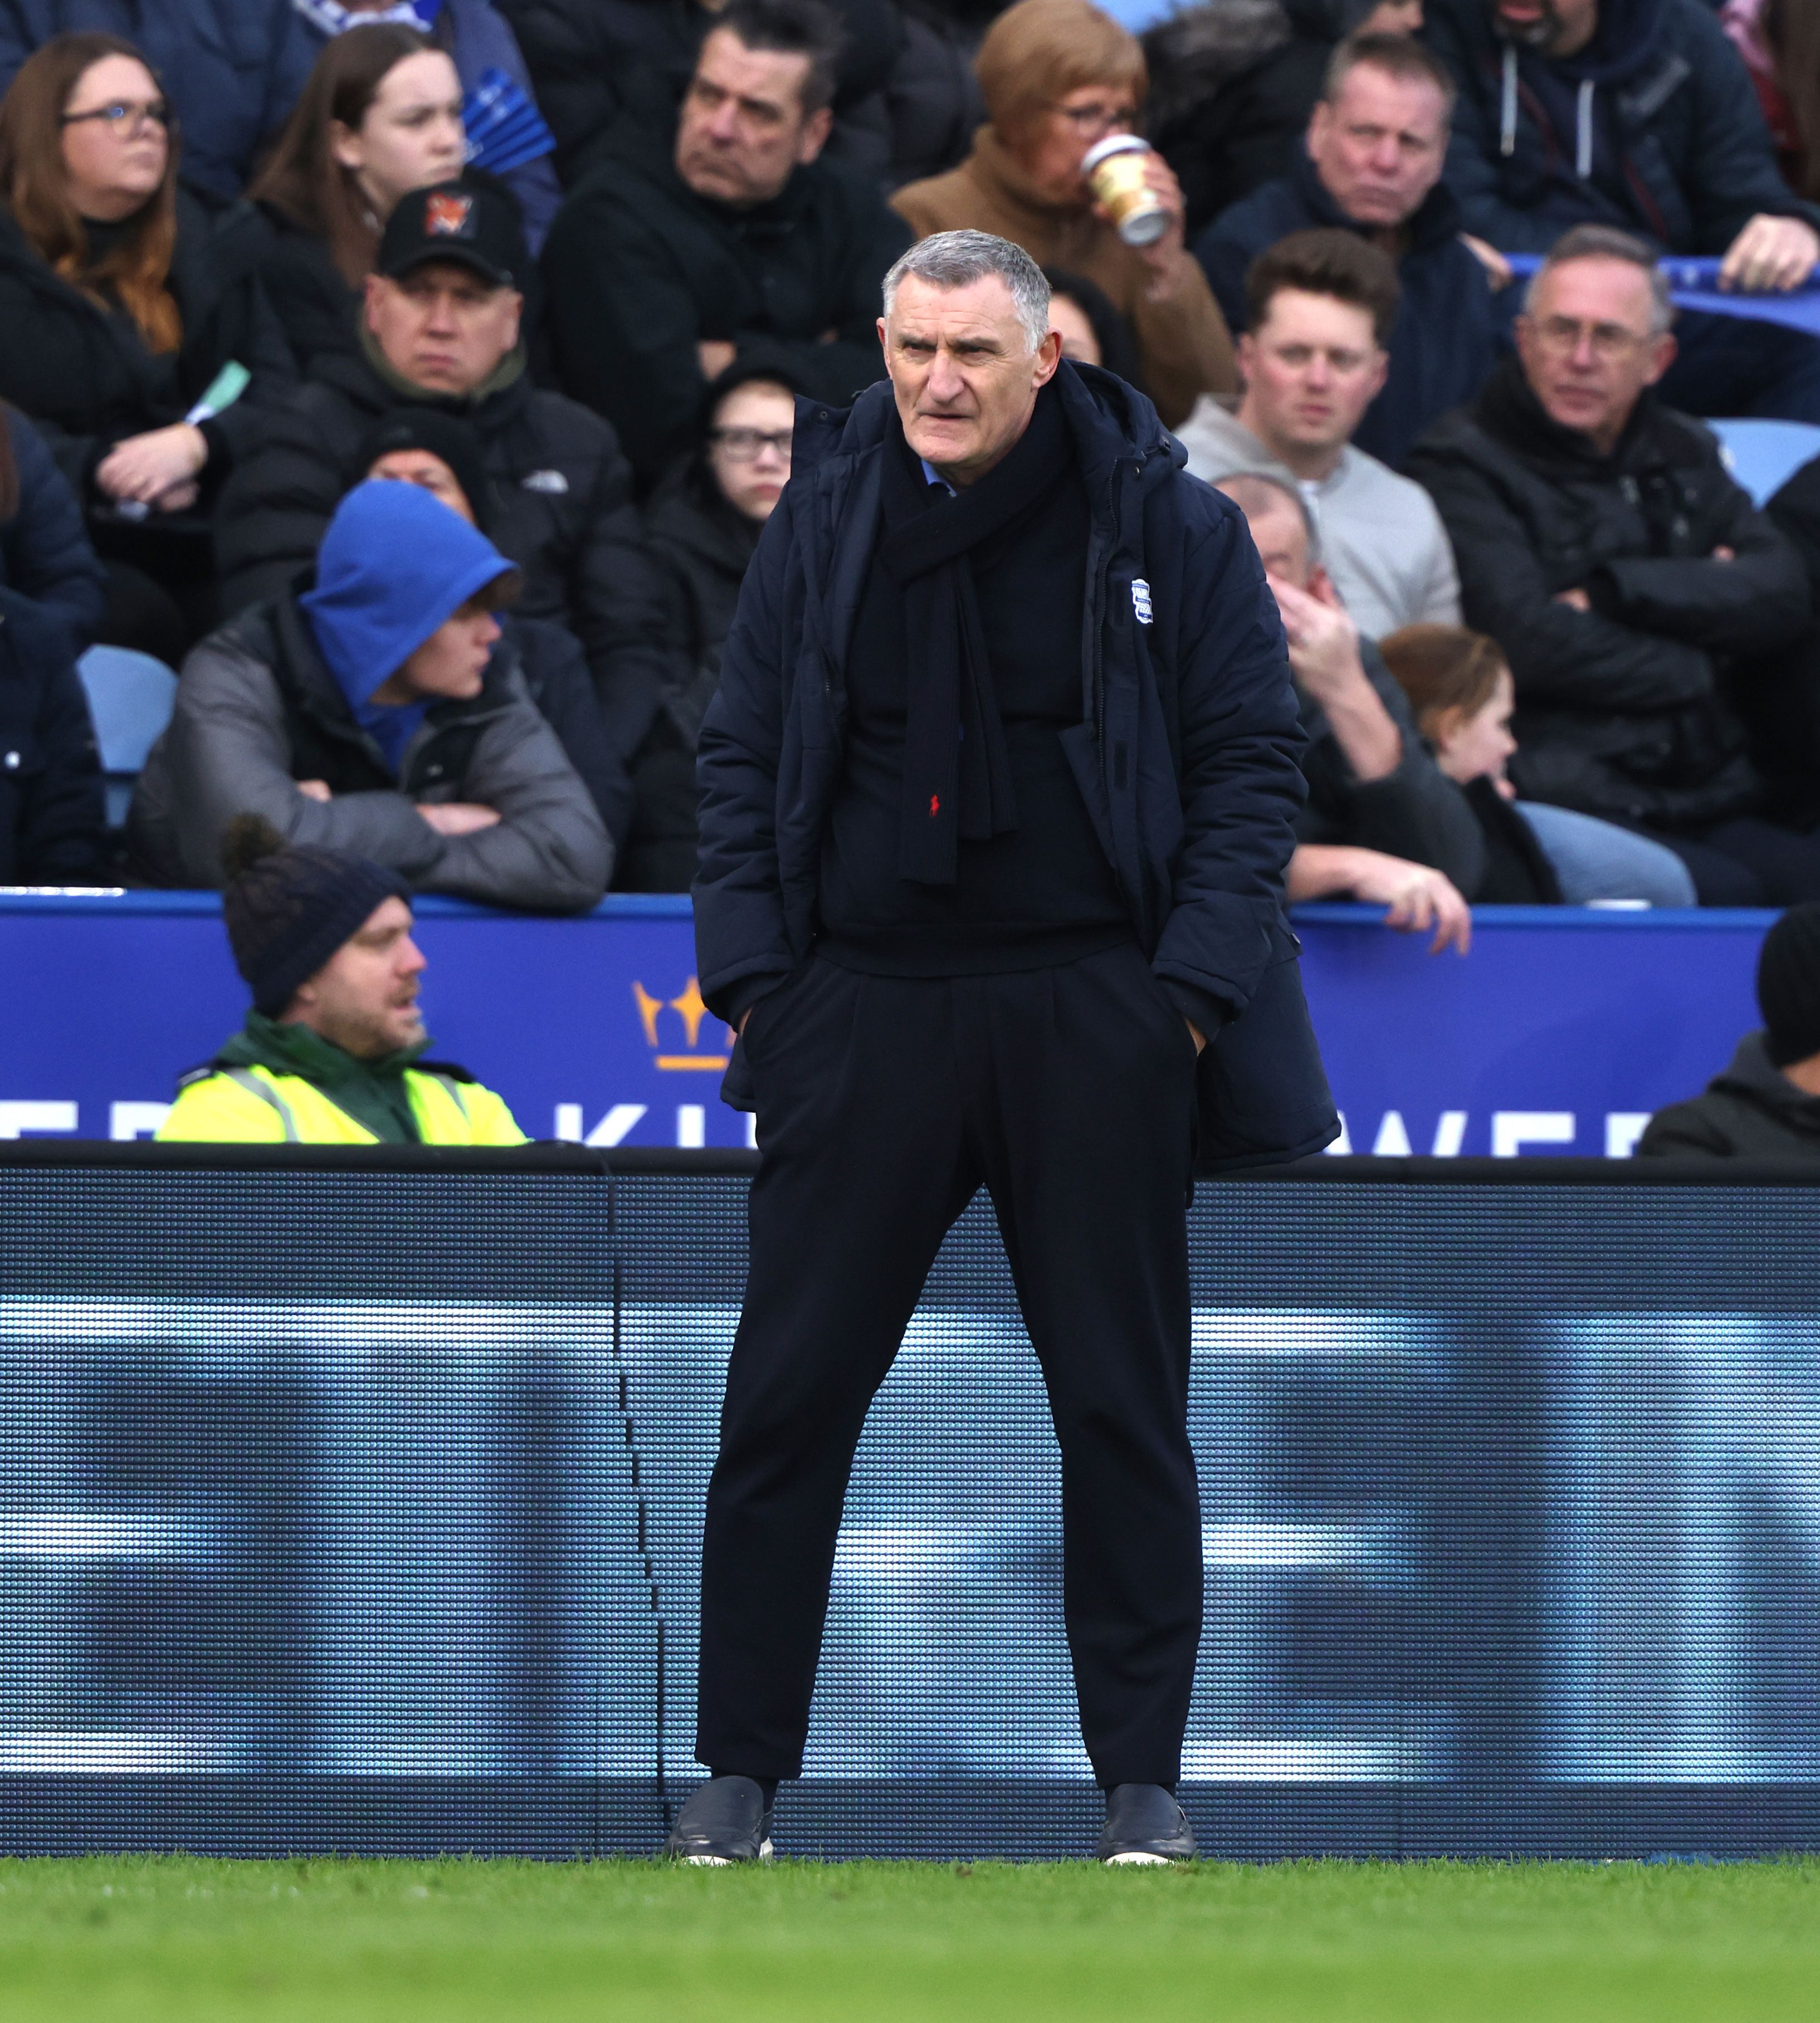 Tony Mowbray is hoping to help Birmingham recover from their failed Wayne Rooney experiment